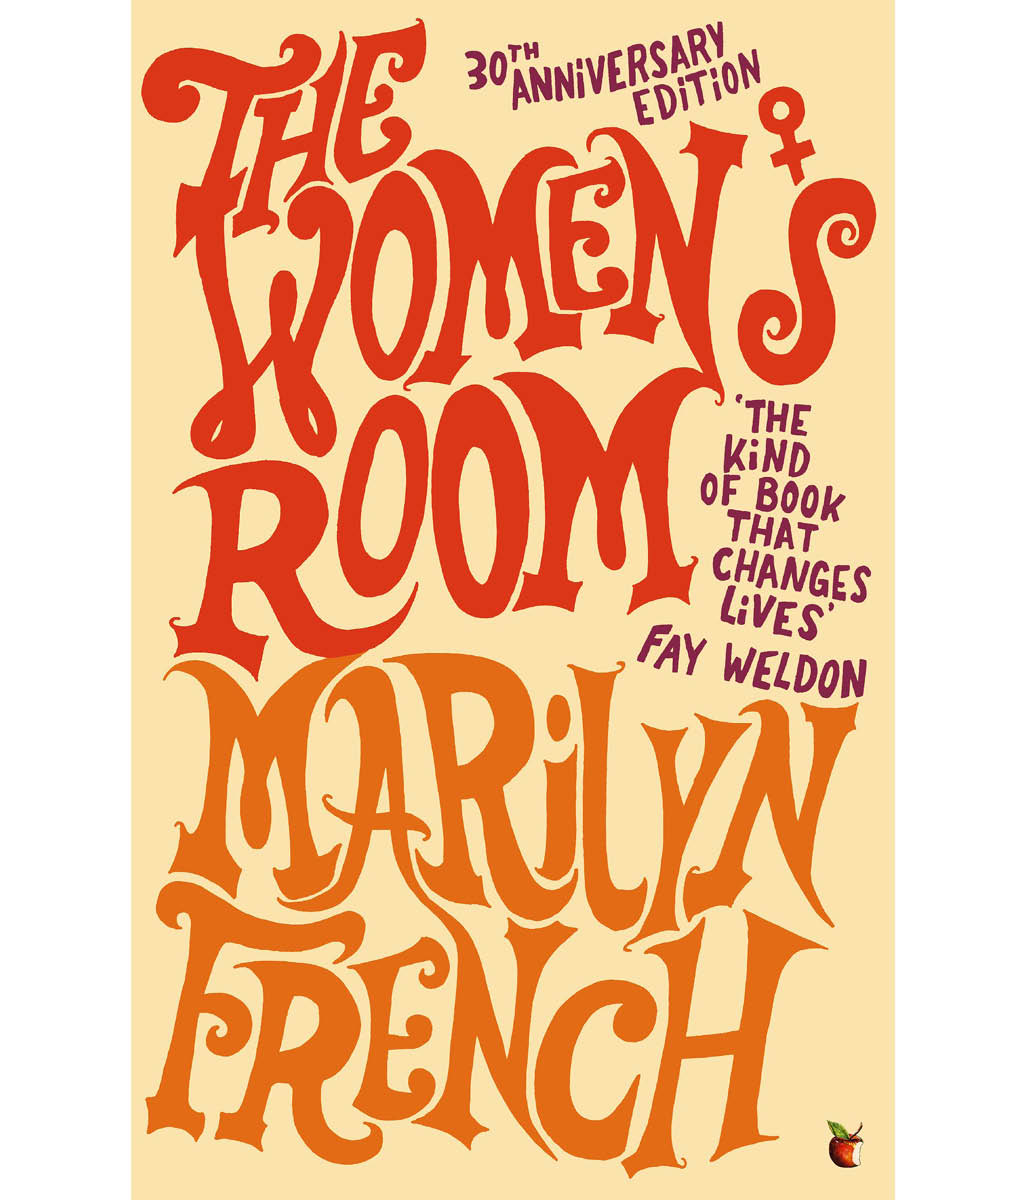 The women's room by Marilyn French